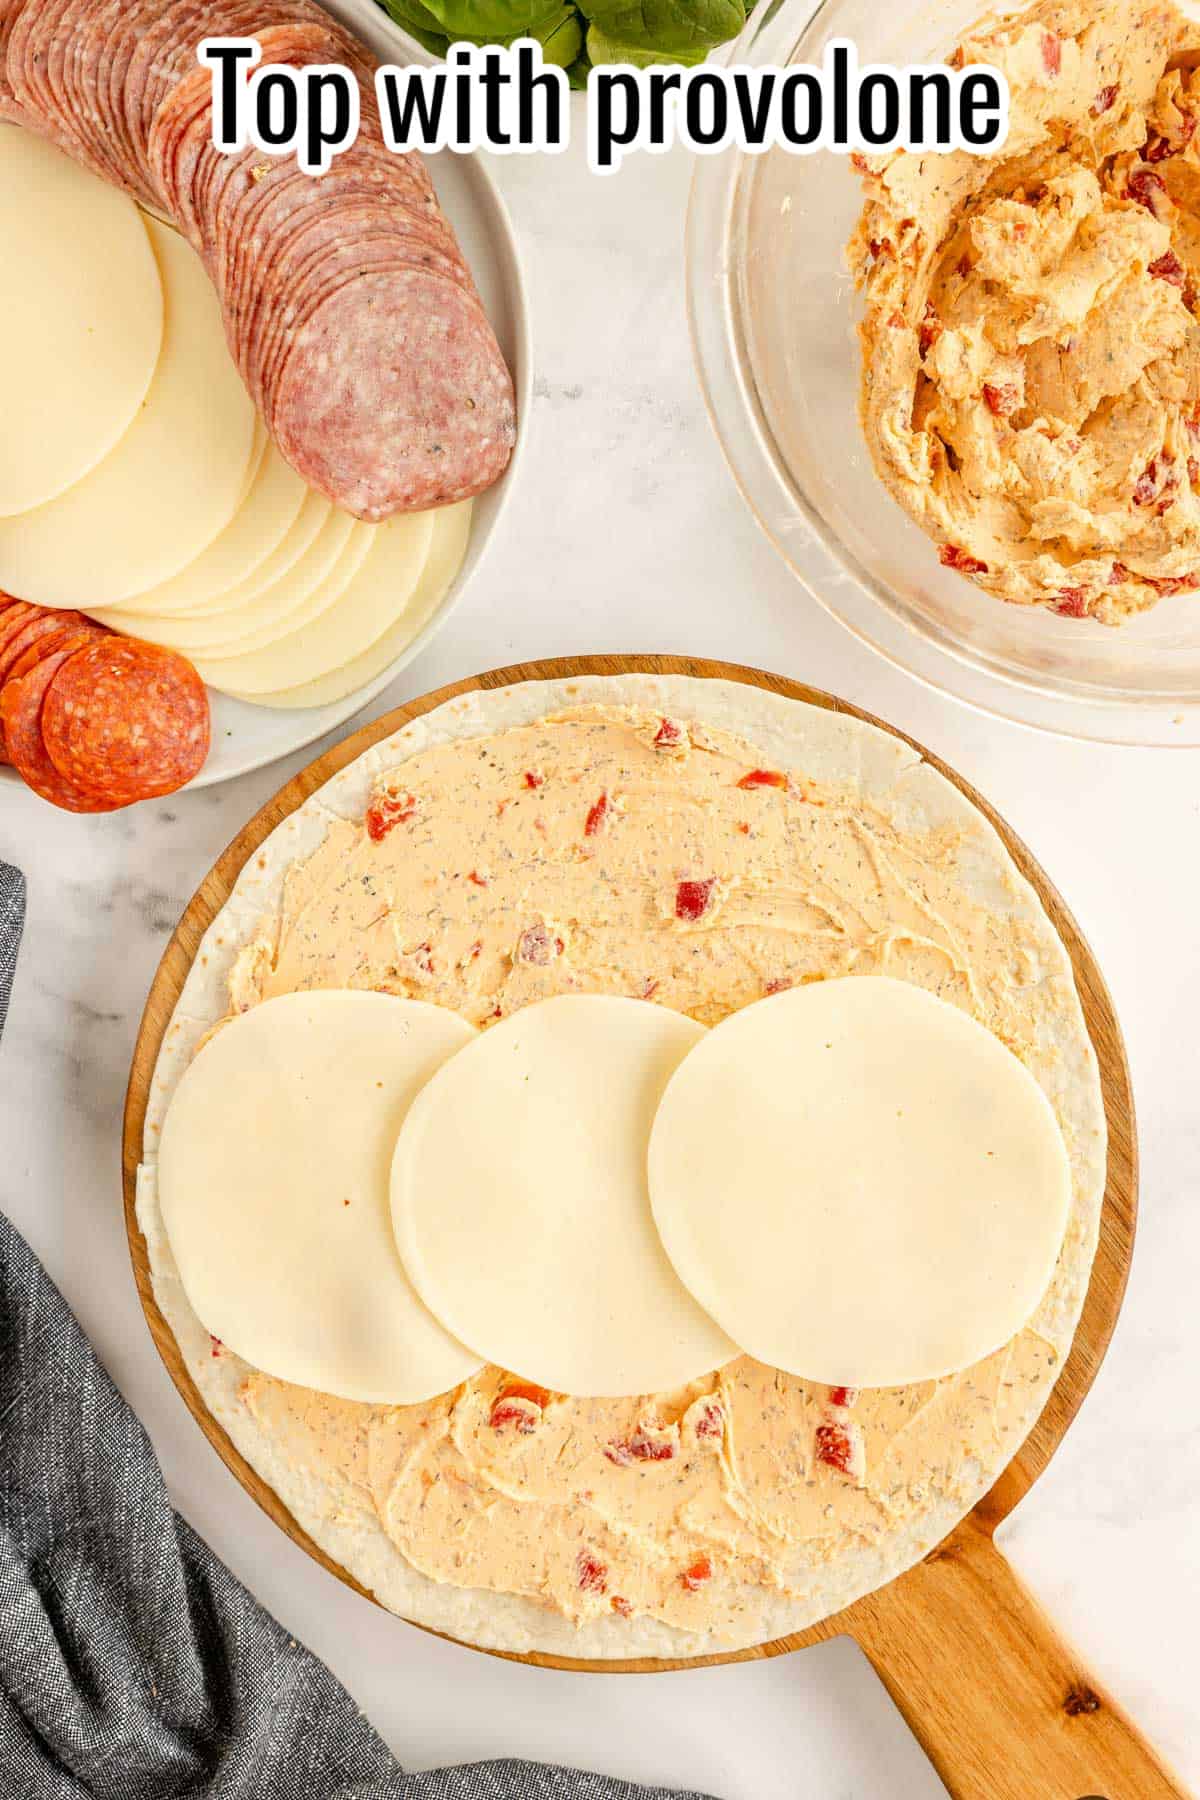 A tortilla spread with cream cheese mixture, and 3 slices of provolone.